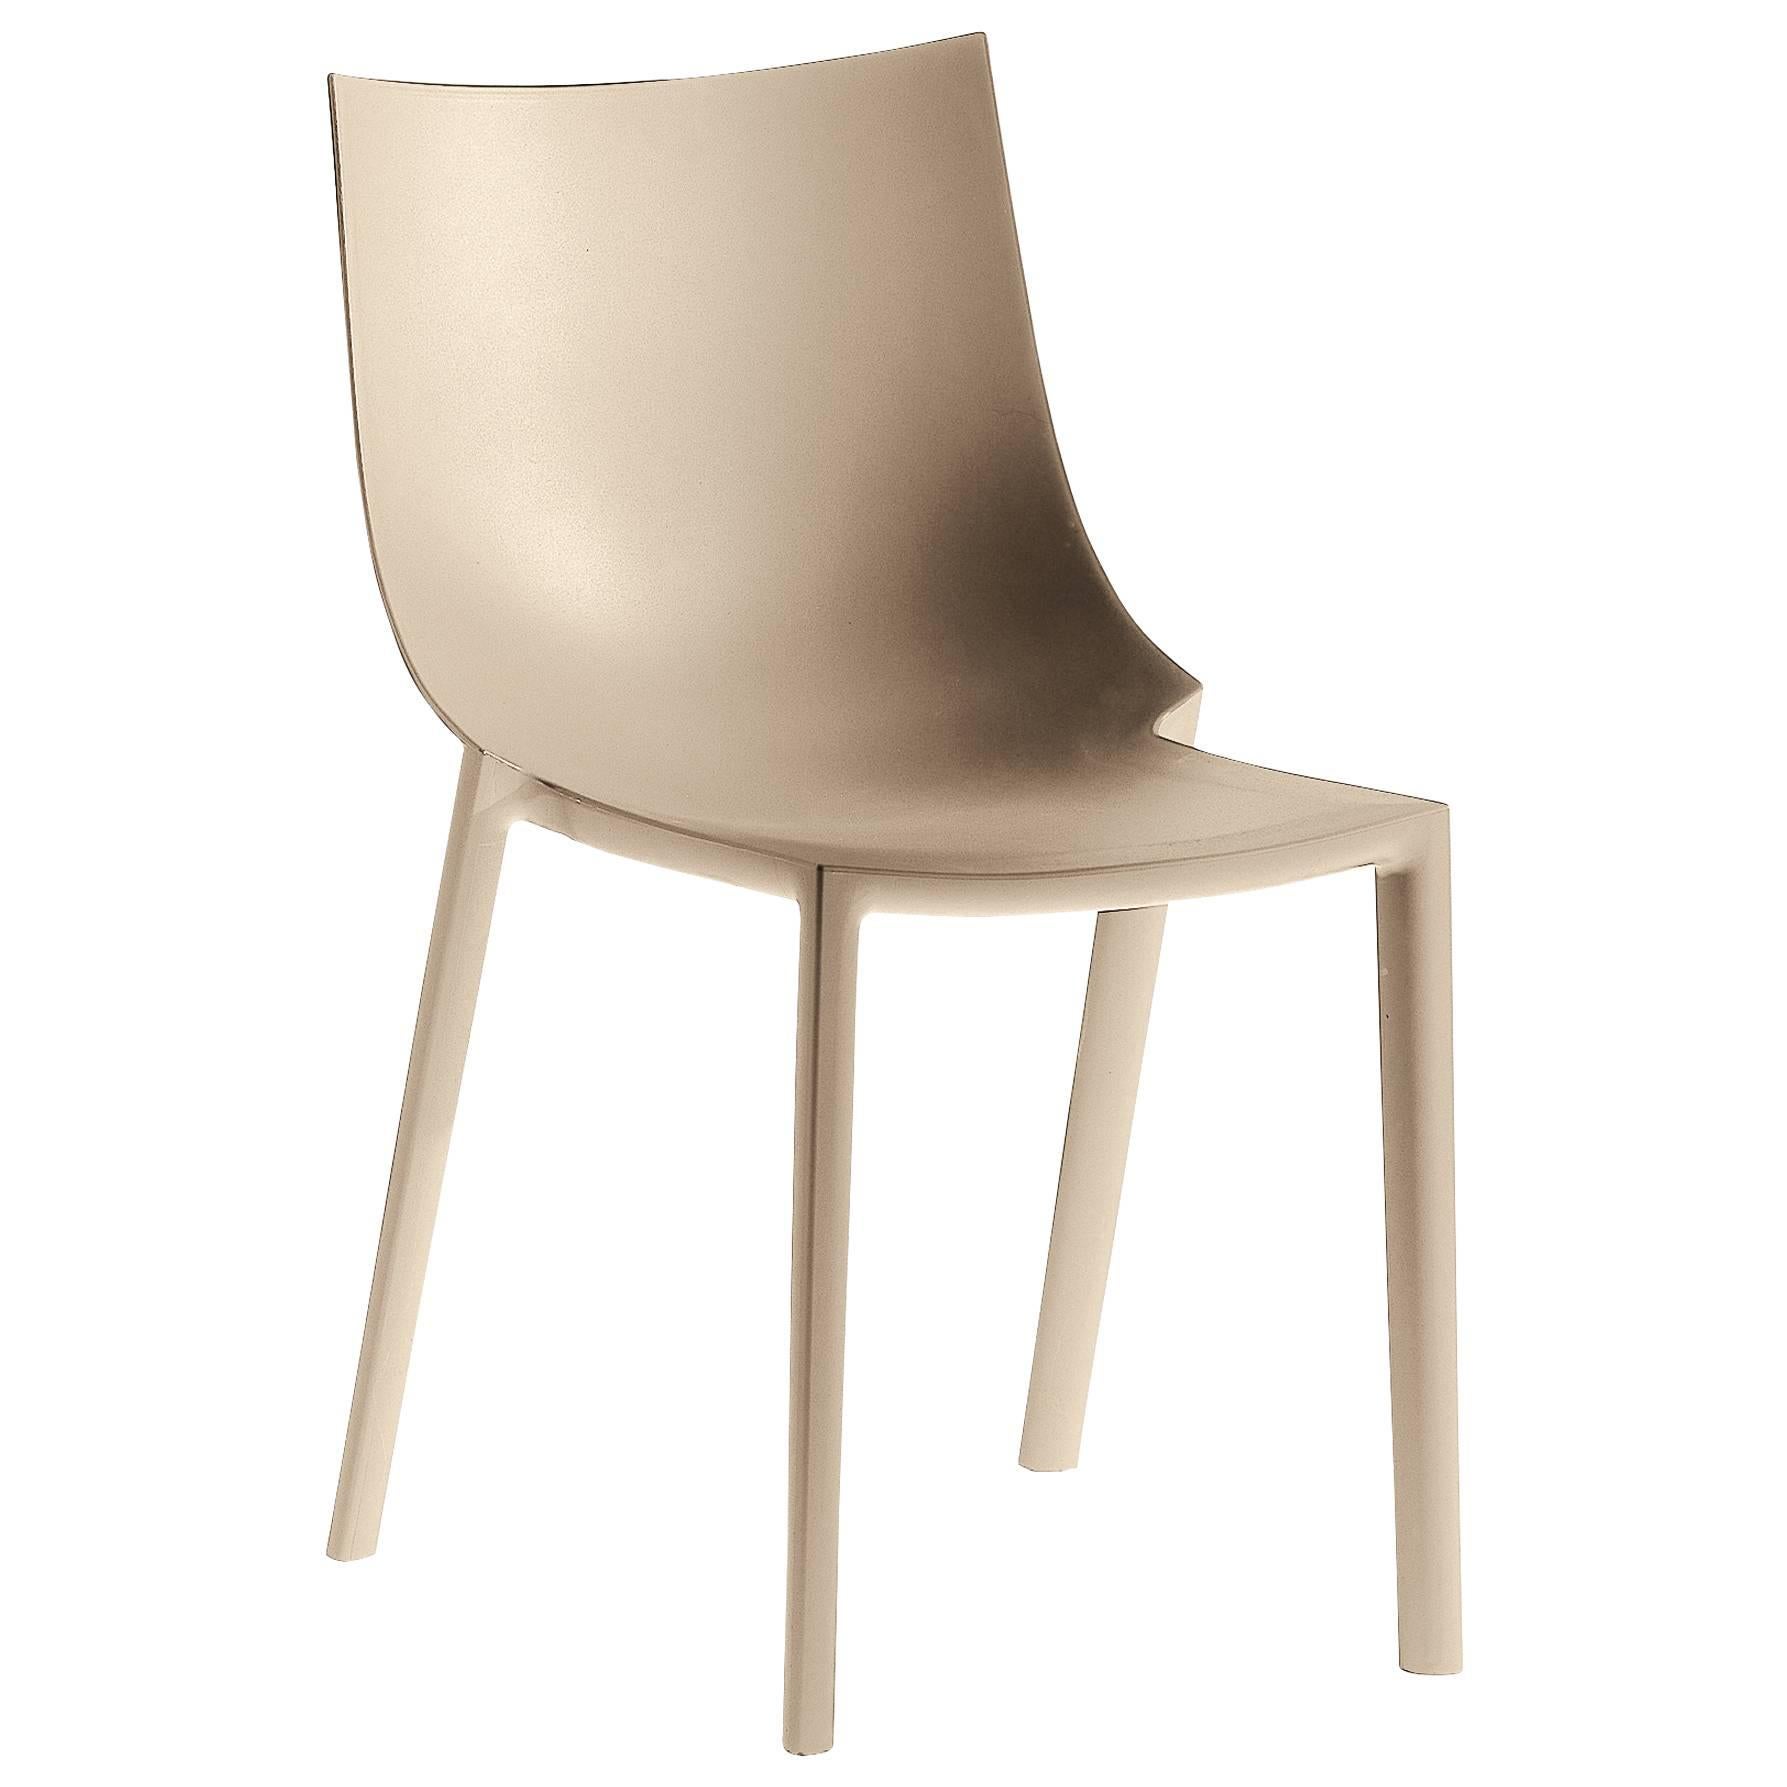 "Bo" Stackable Colored Chair Designed by Philippe Starck for Driade